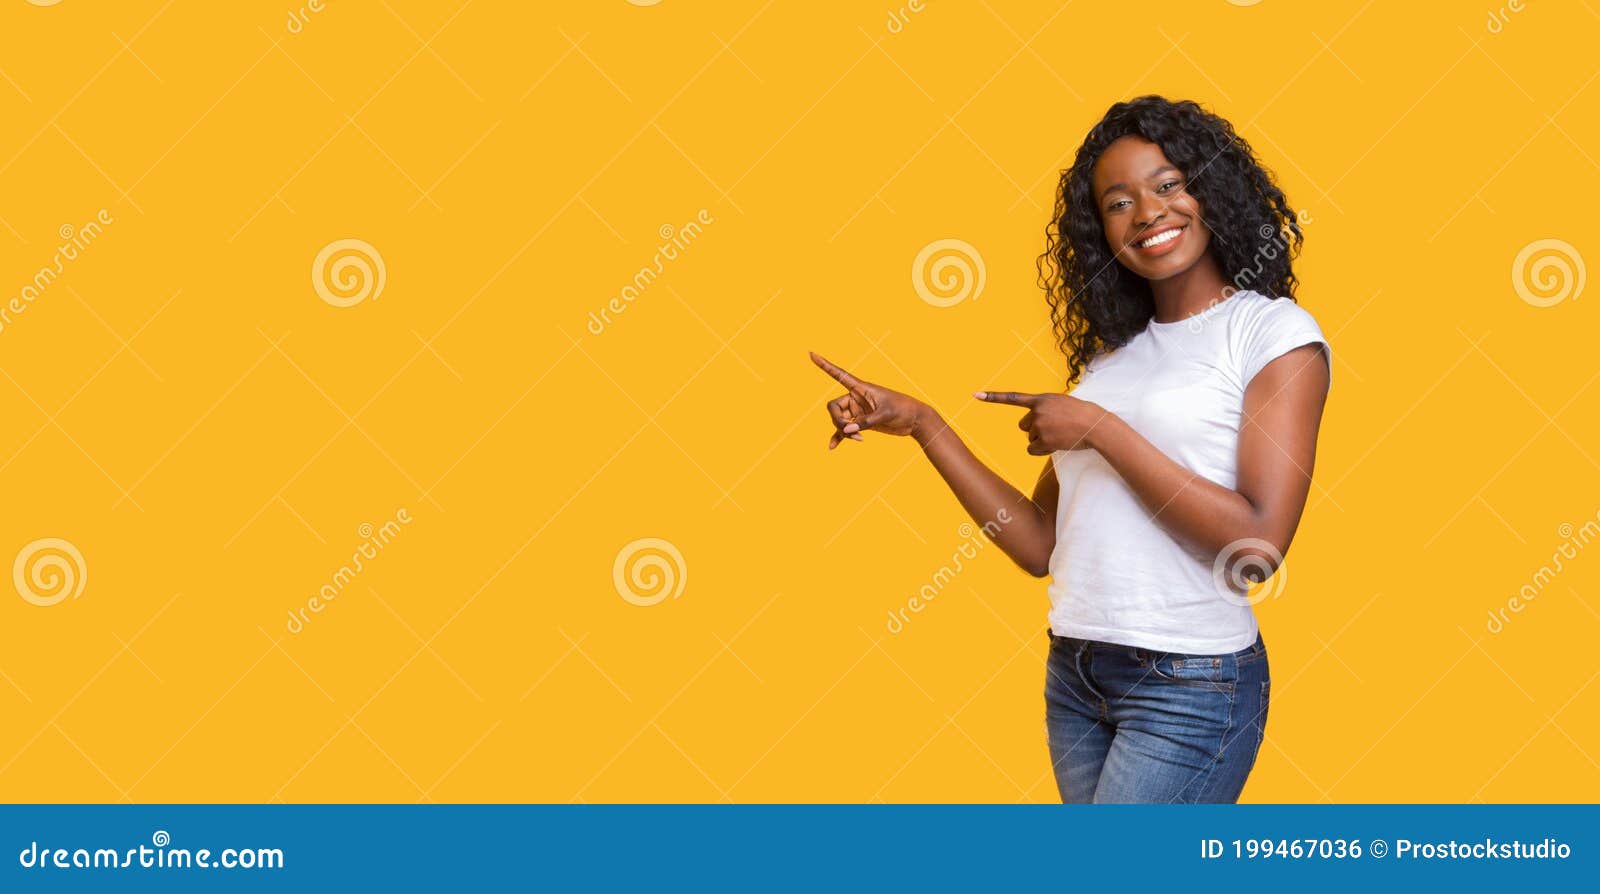 cheerful black lady pointing at copy space on yellow